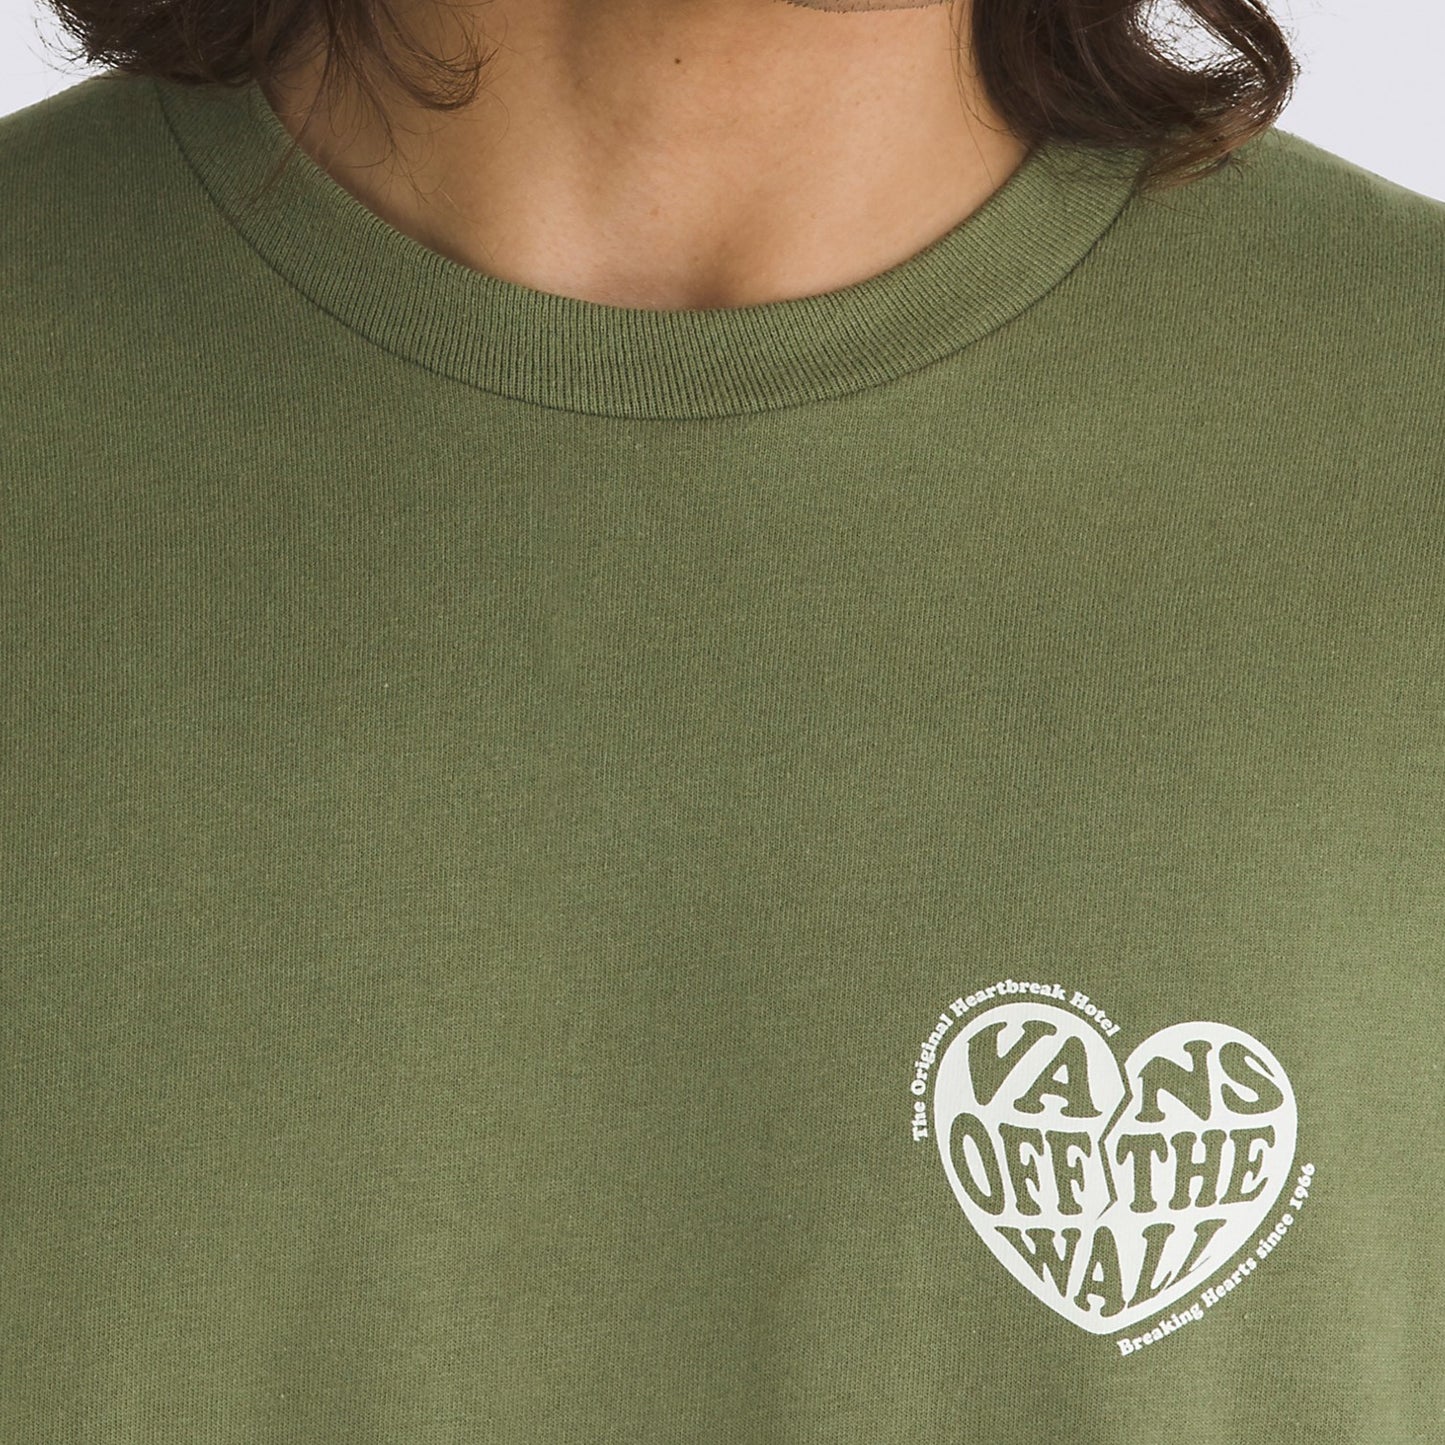 VANS No Players Graphic T-Shirt - Olive